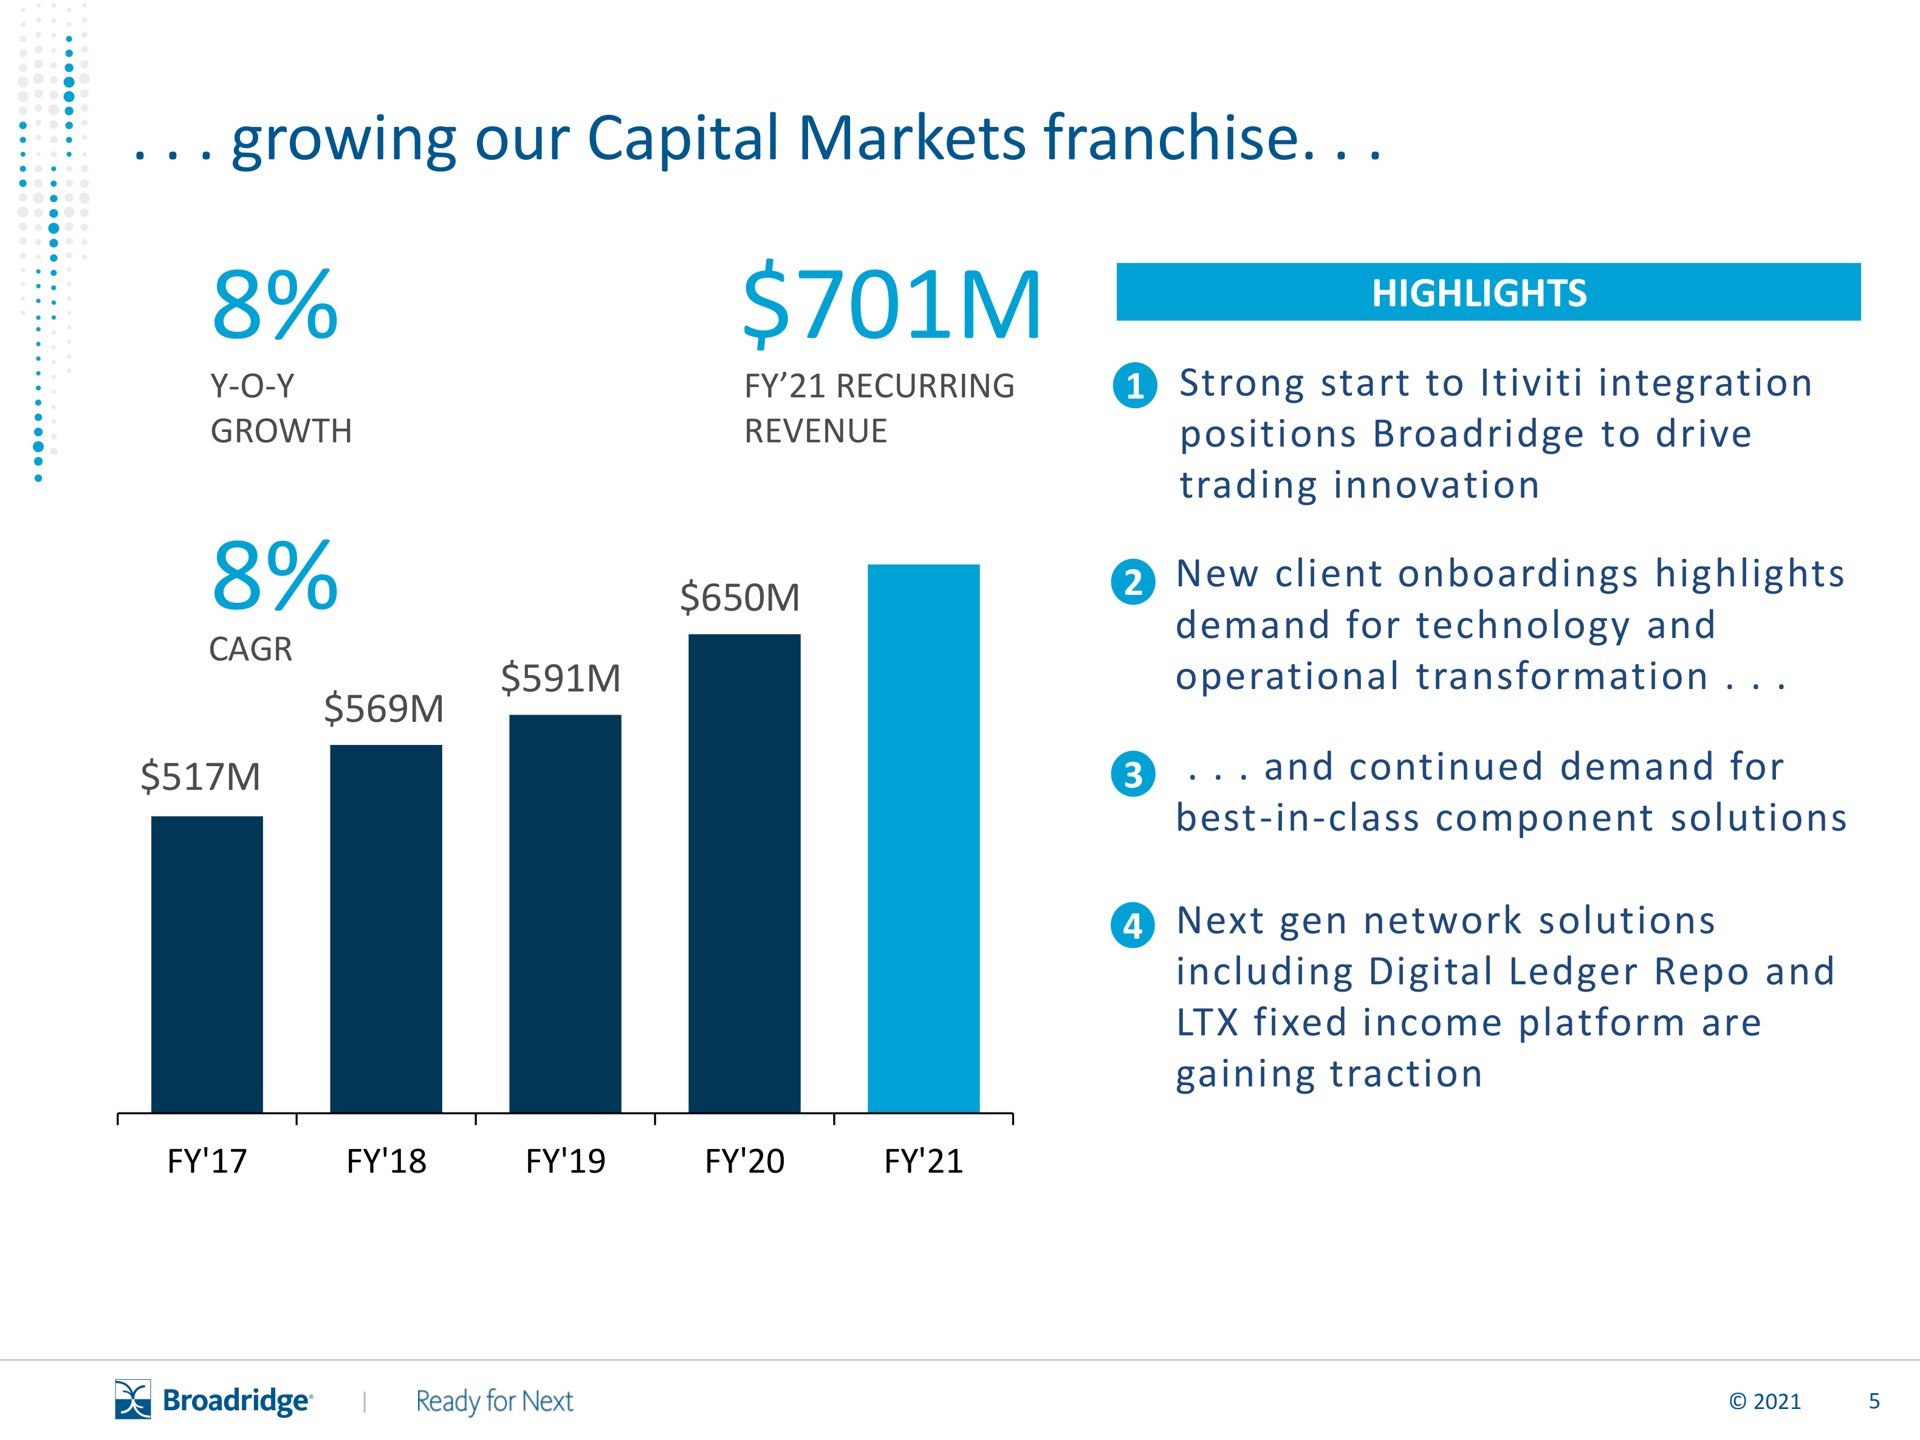 growing our capital markets franchise | Broadridge Financial Solutions